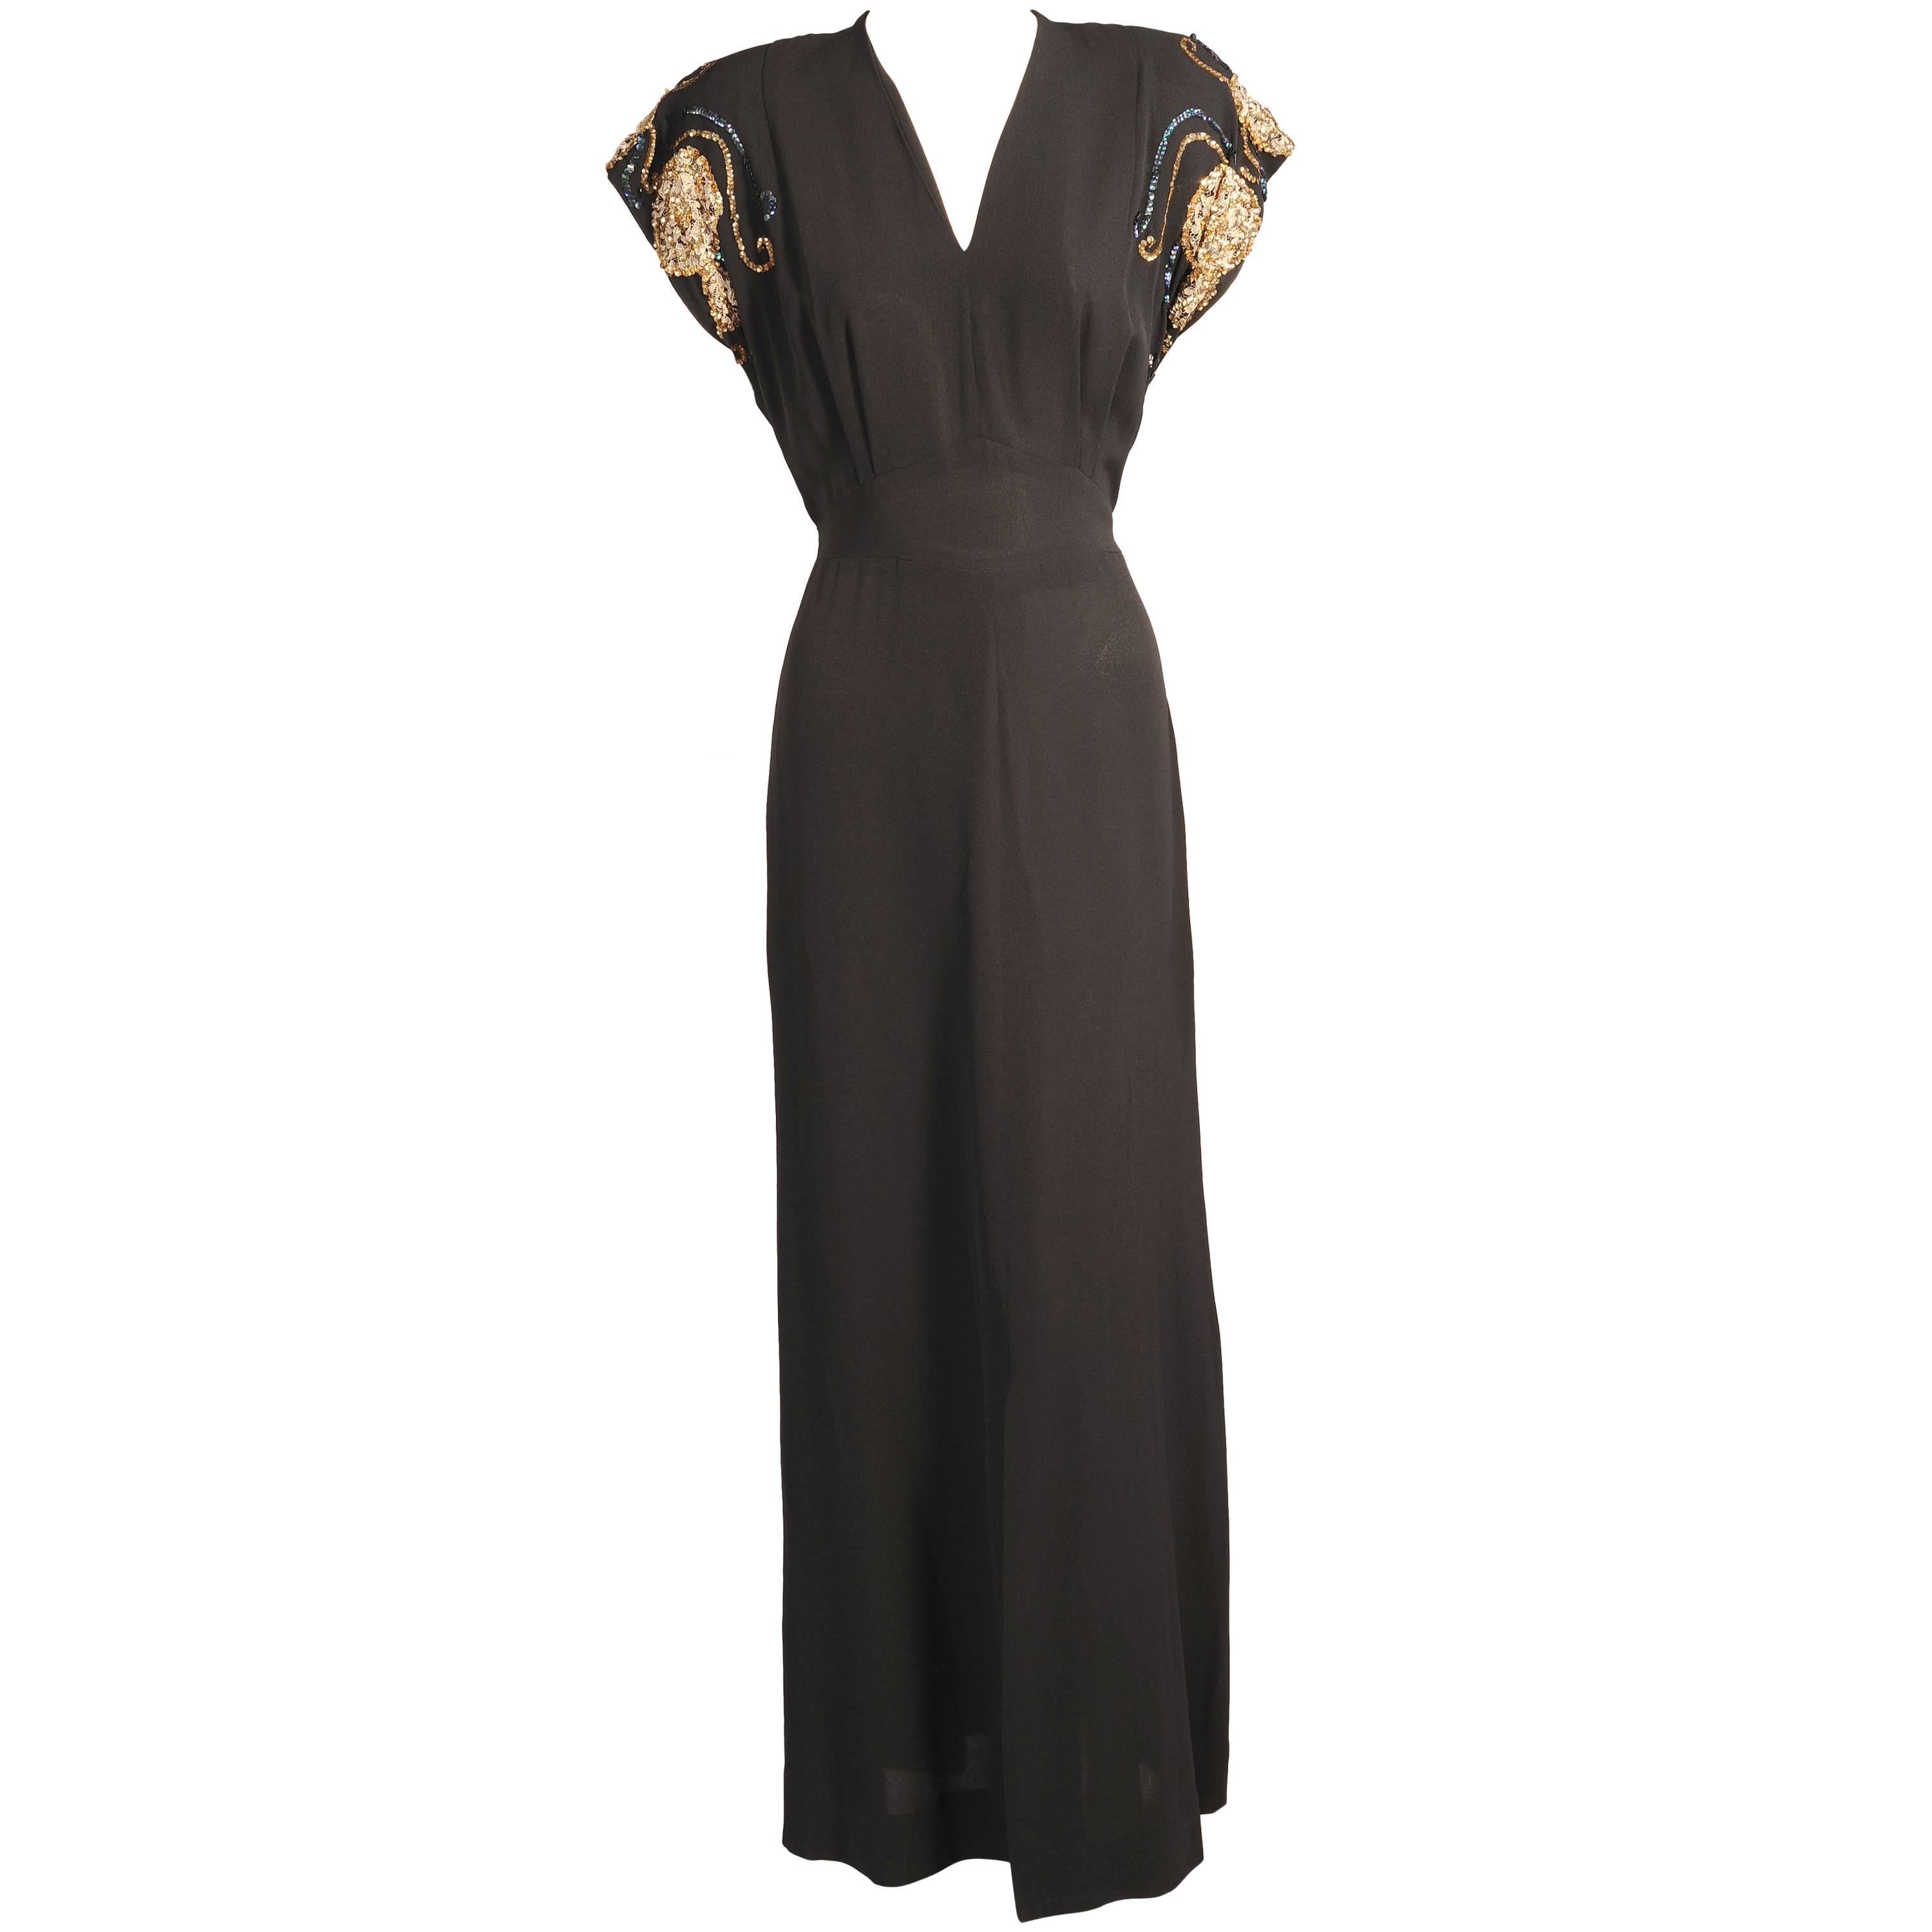 Late 1930's Larger Size Crepe Evening Dress, Metallic Lace and Sequin Trim